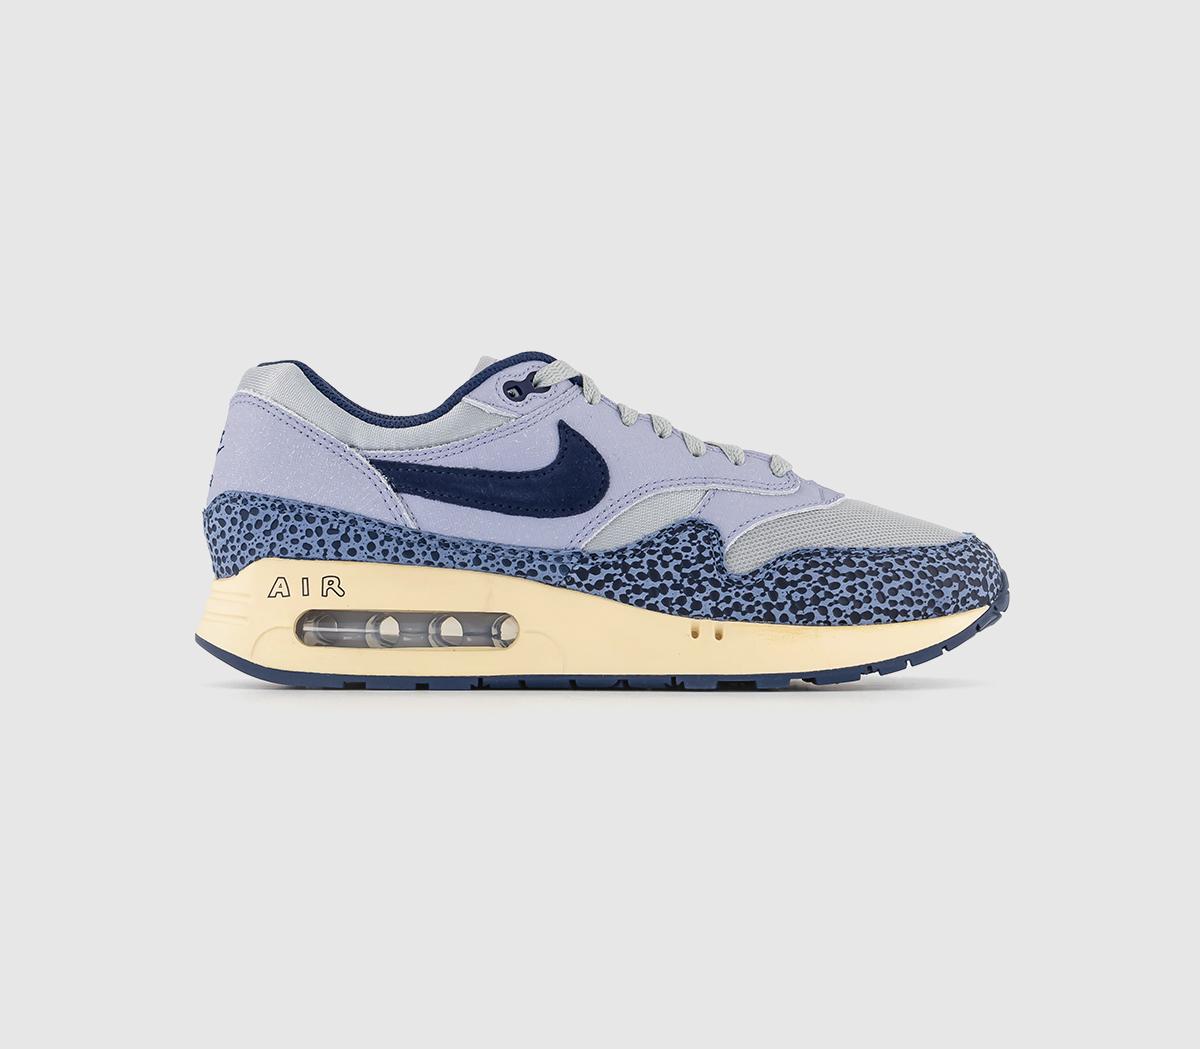 Size 8.5 - Nike Air Force 1 Low Sketch 2020 for sale online